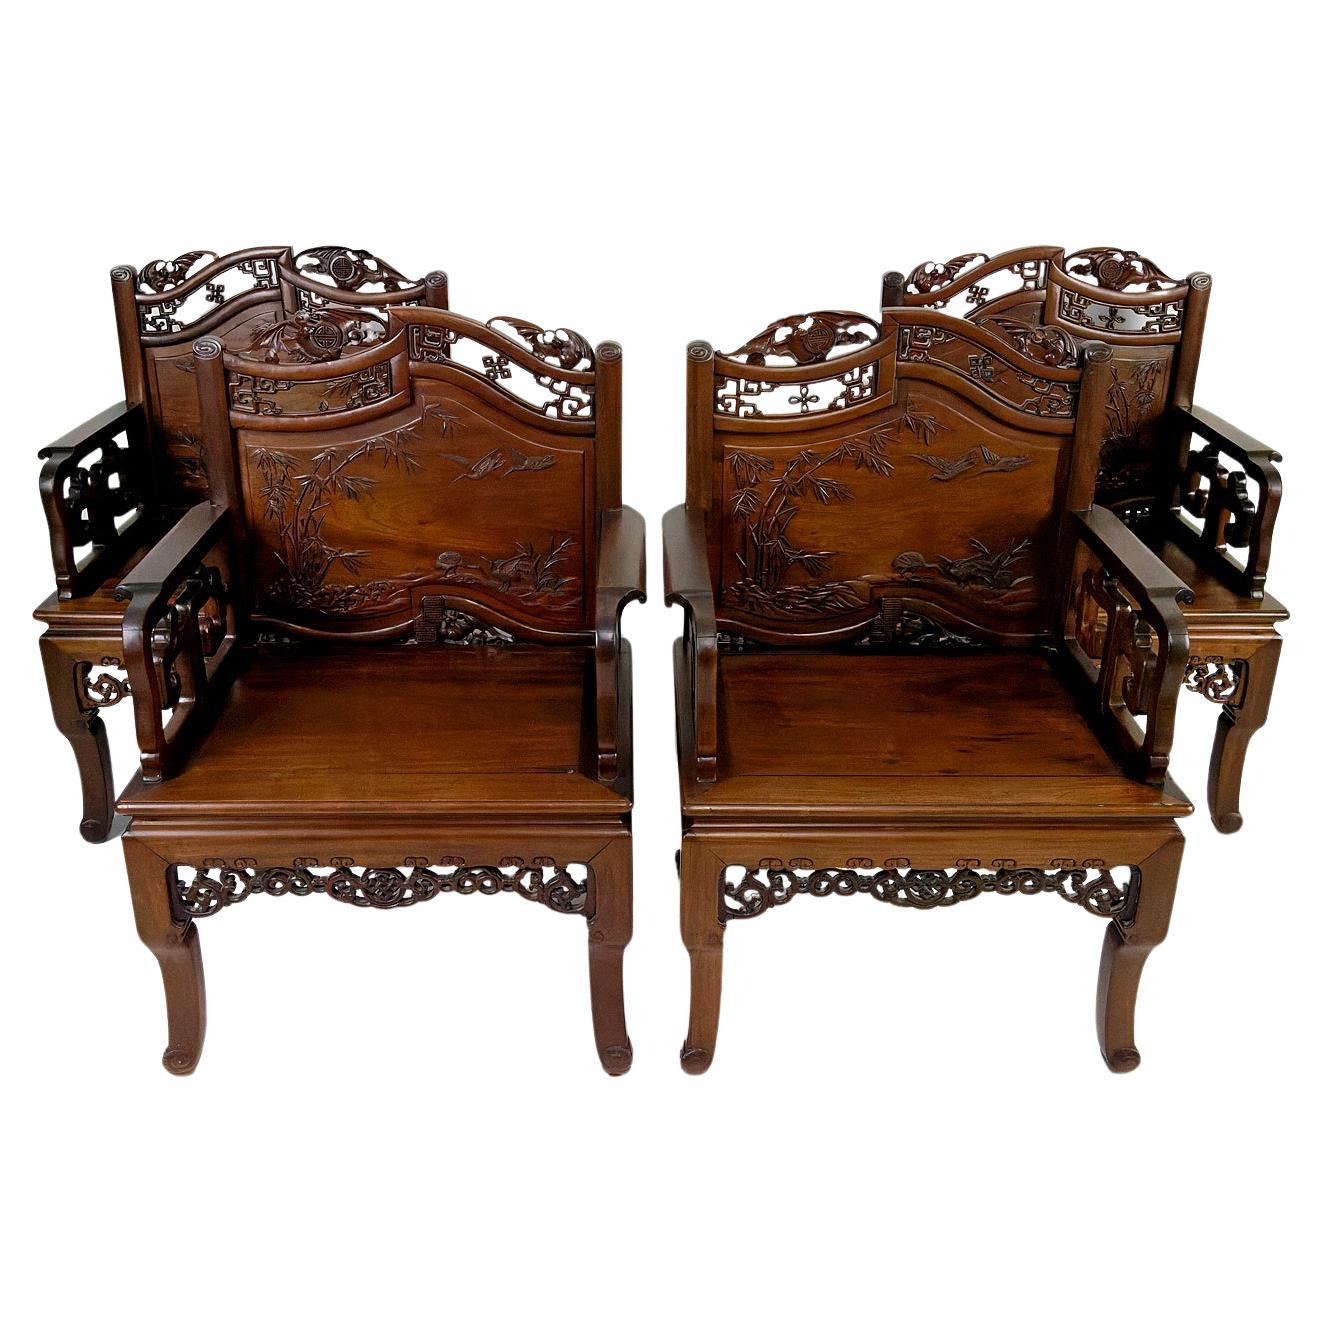 Set of 4 important Asian armchairs with Bats and Cranes, Indochina, Circa 1880 For Sale